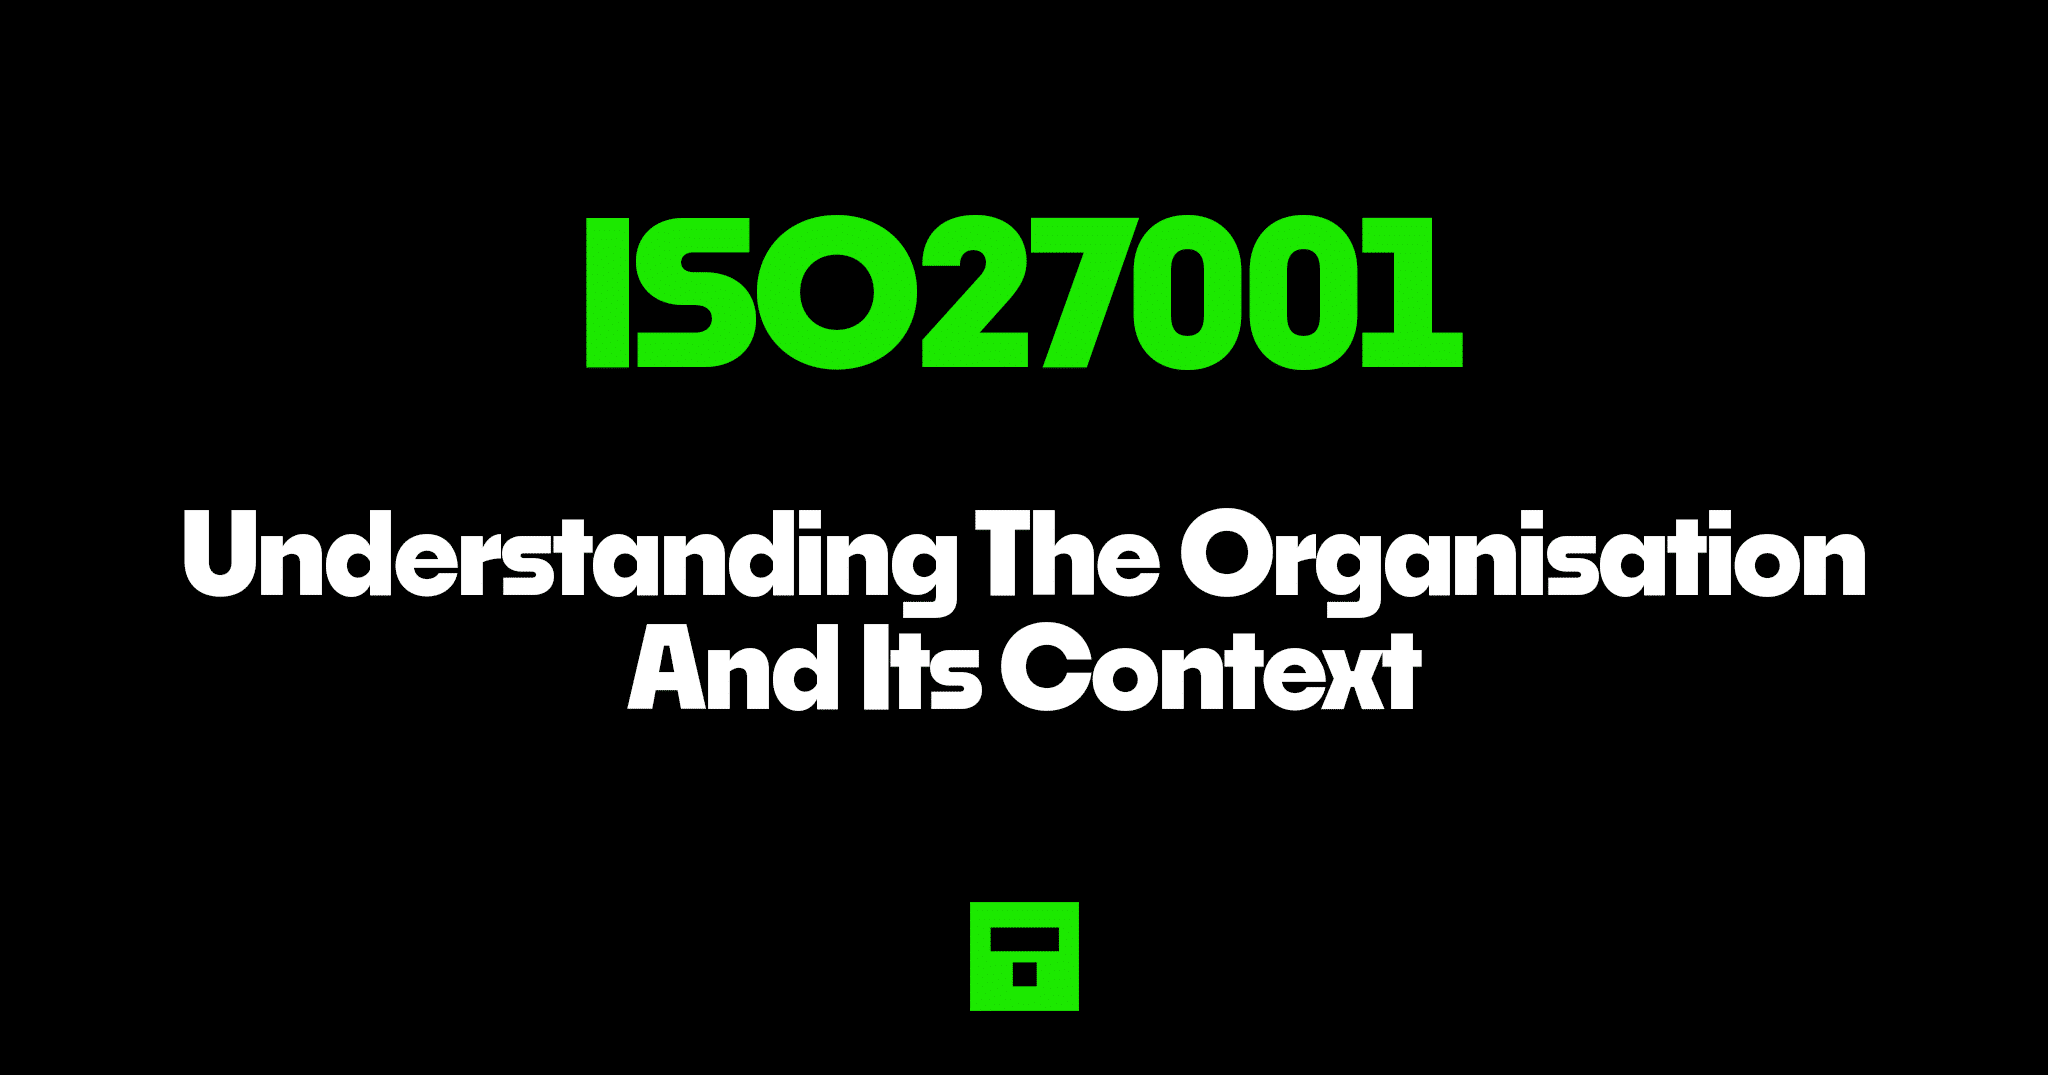 ISO27001 Understanding The Organisation And Its Context